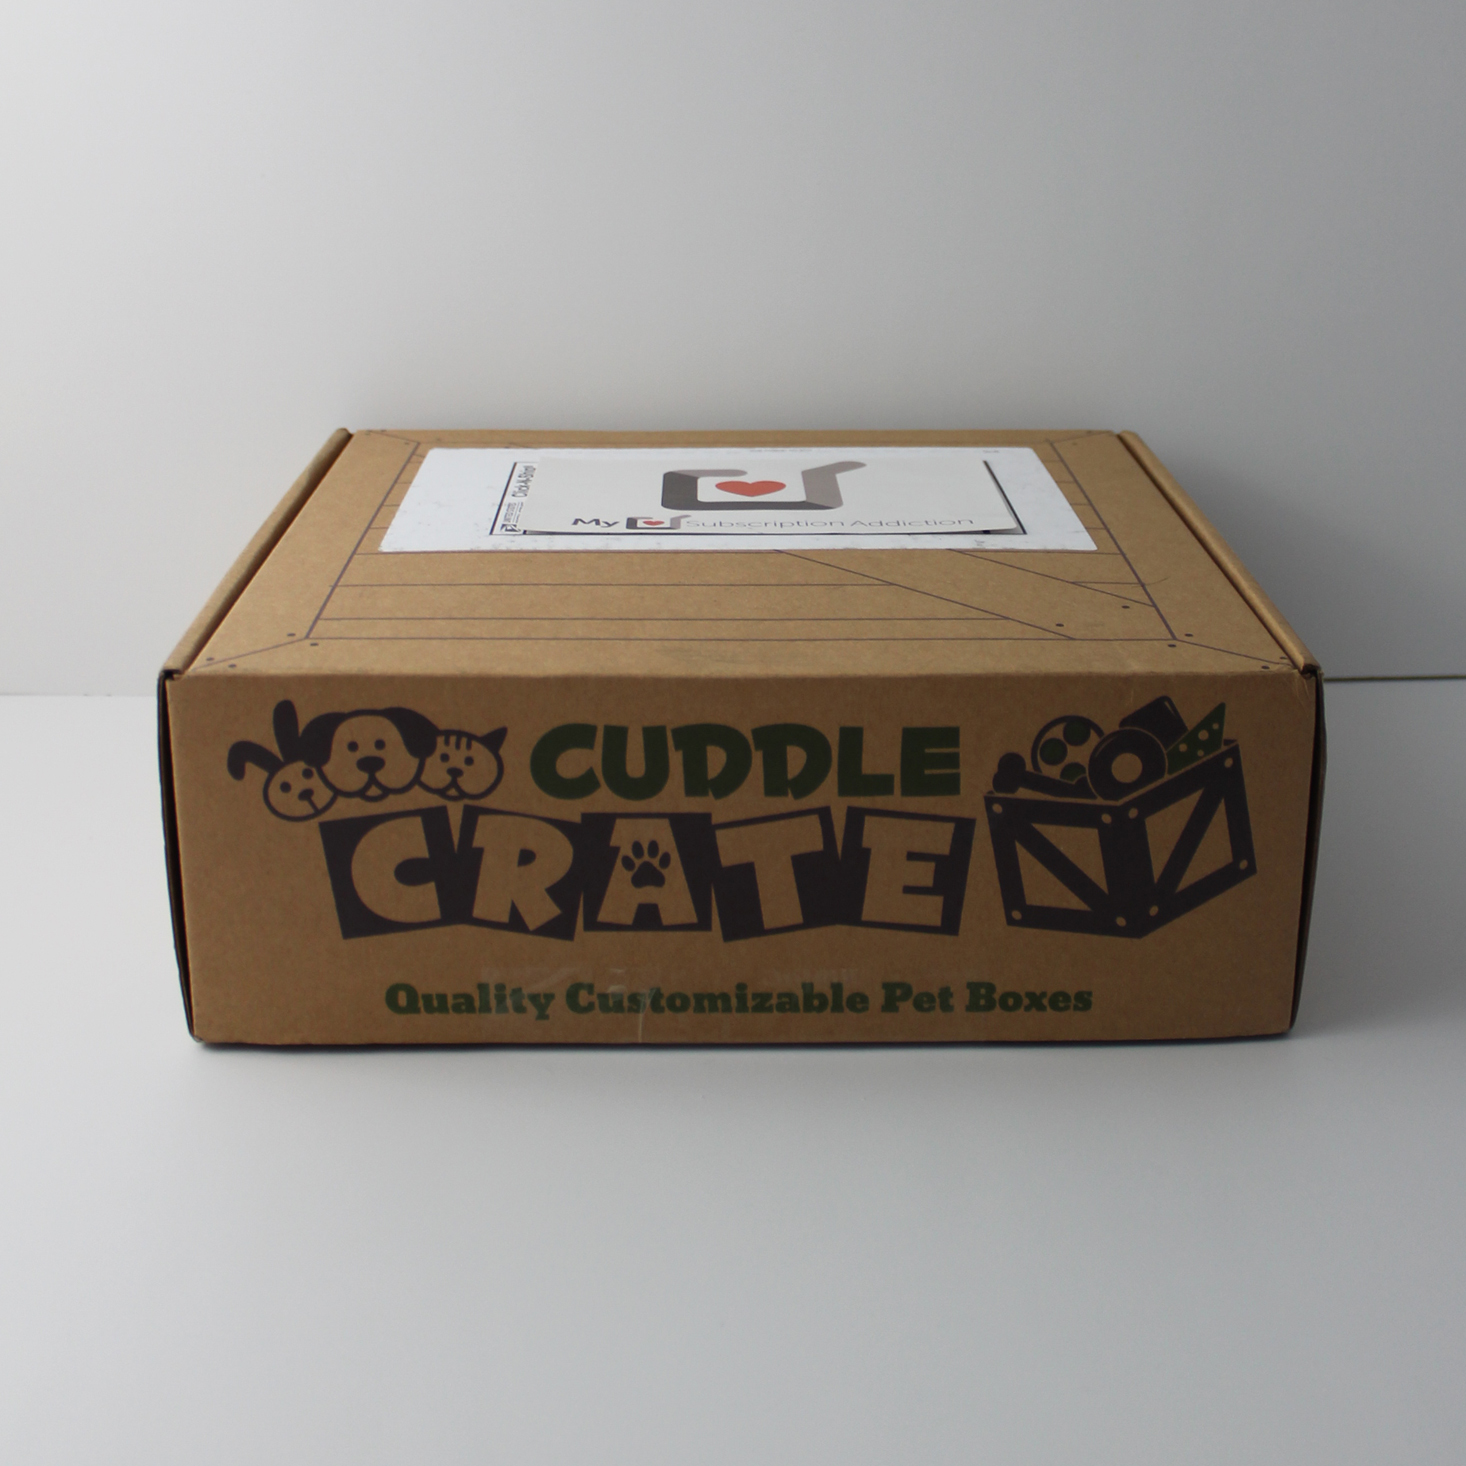 Cuddle Crate Cat Box Review + Coupon – February 2018